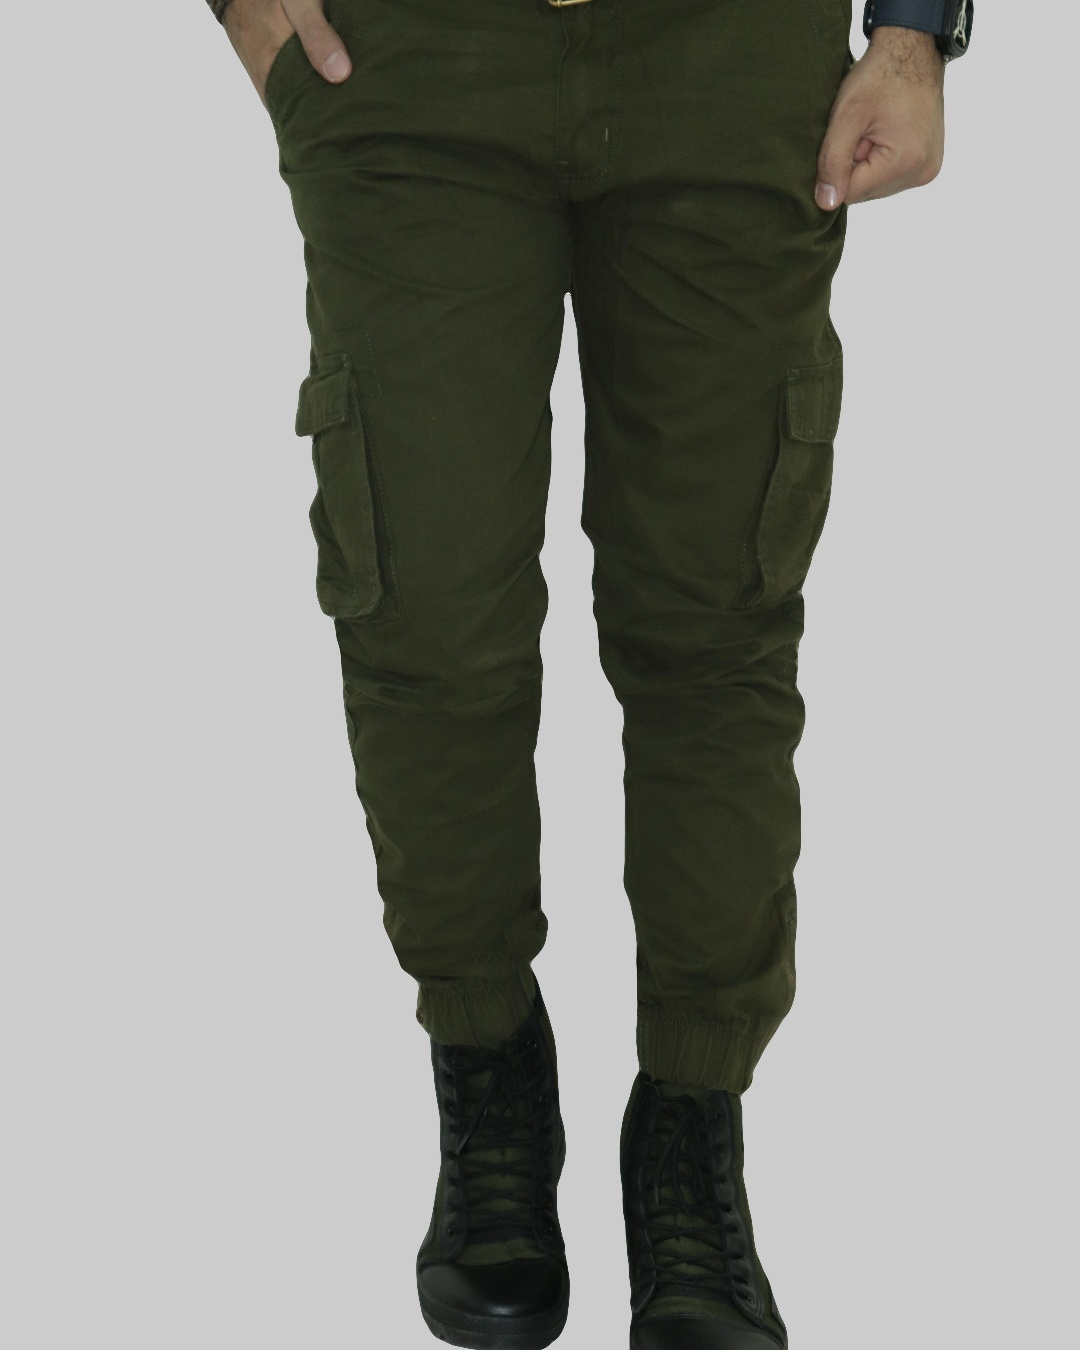 How to Style Cargo Pants Outfits for Men – Tonywell